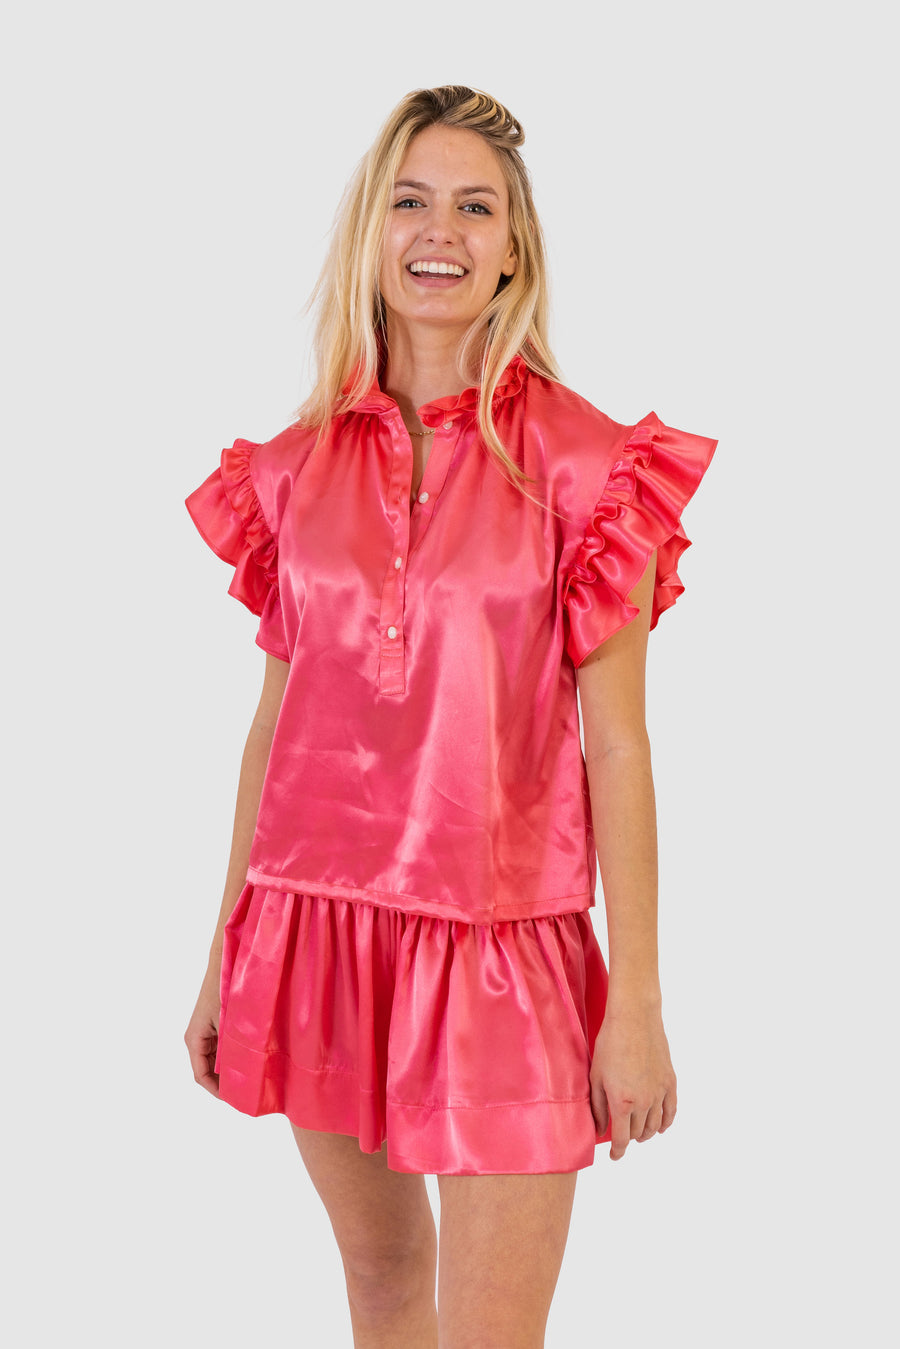 PIXIE TOP PINK YACHT POLYSATIN *LIMITED*EDITION*